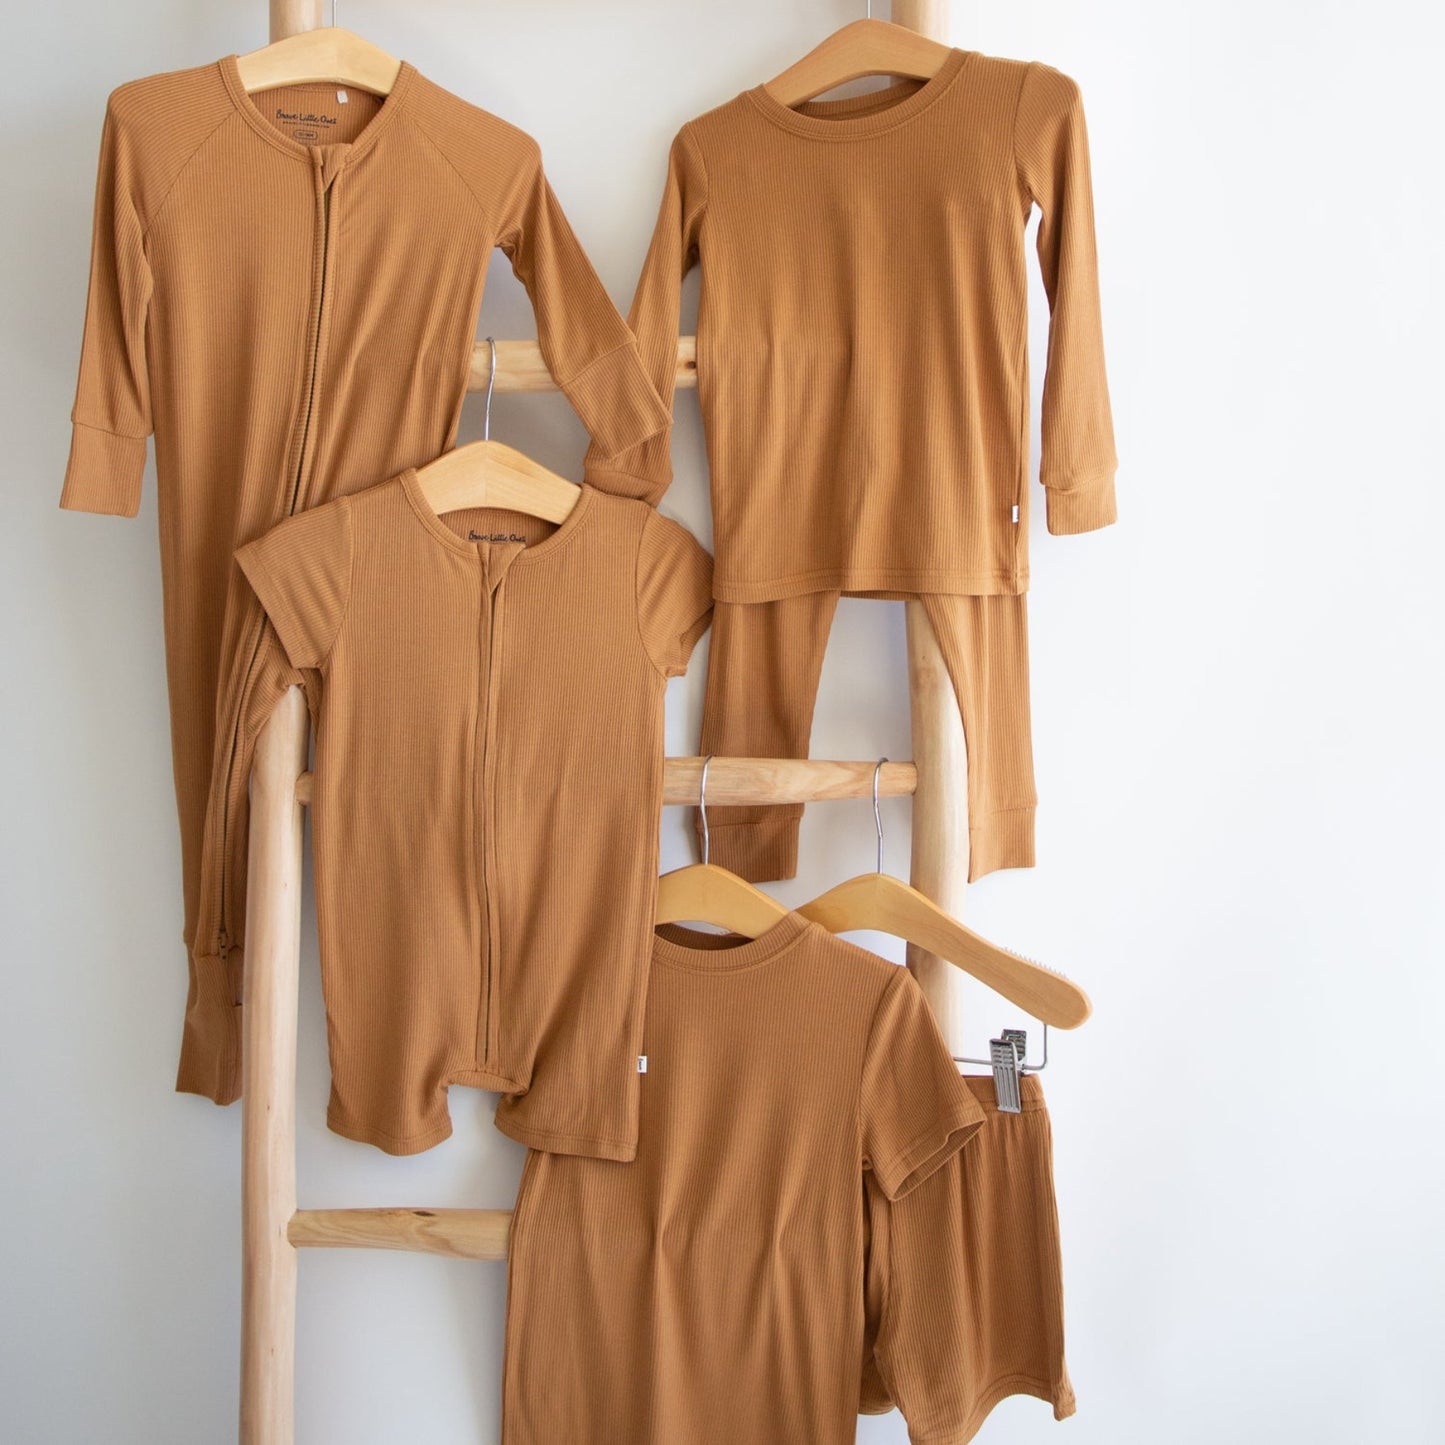 Camel Small Ribbed Two-Piece Set